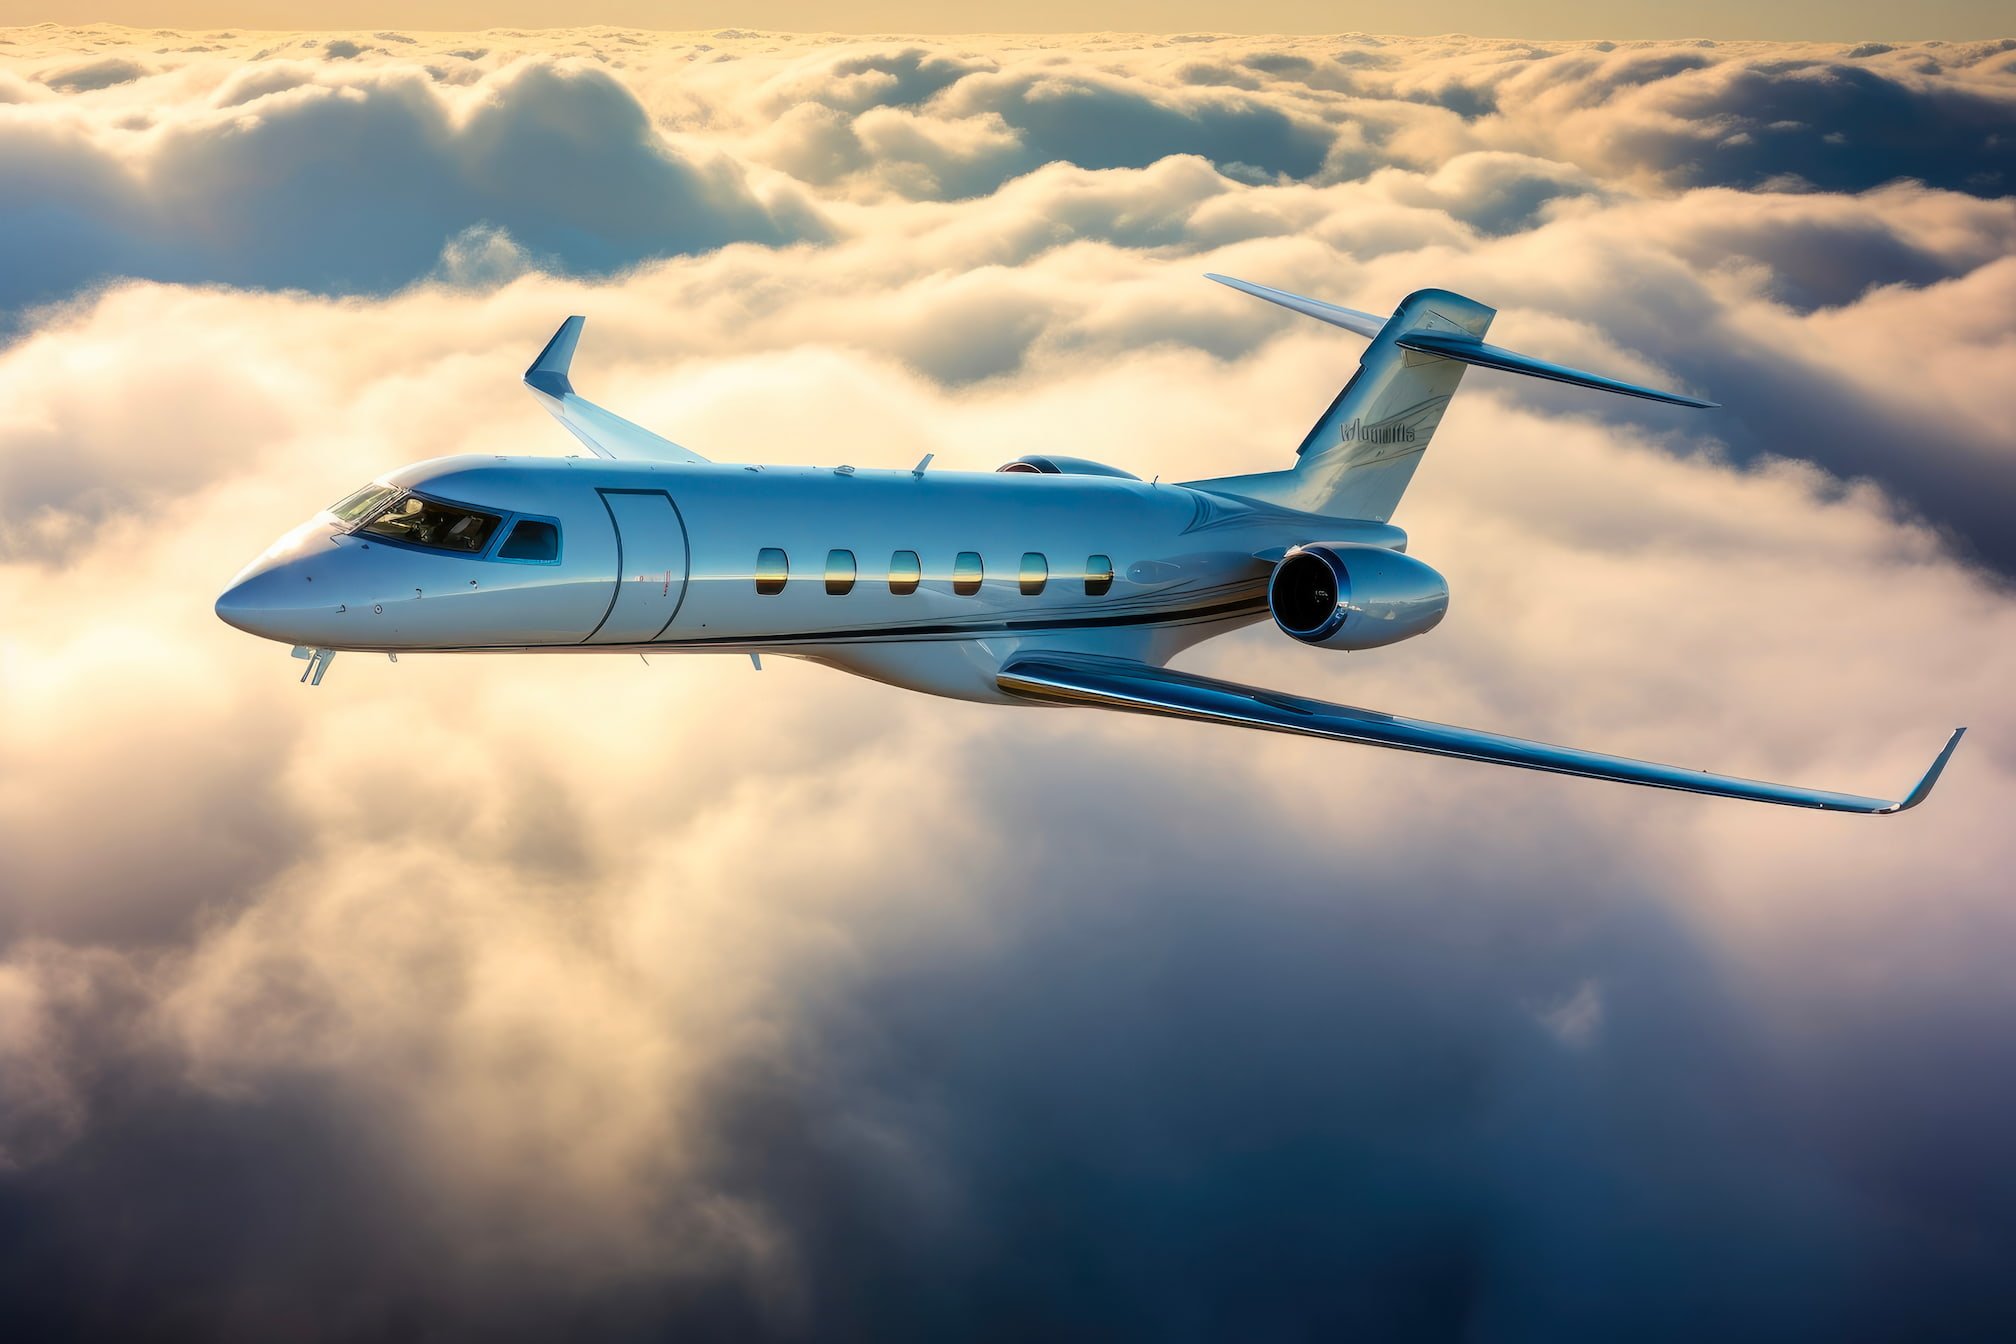 Gulfstream Global G650 Business aviation aircraft in the sky